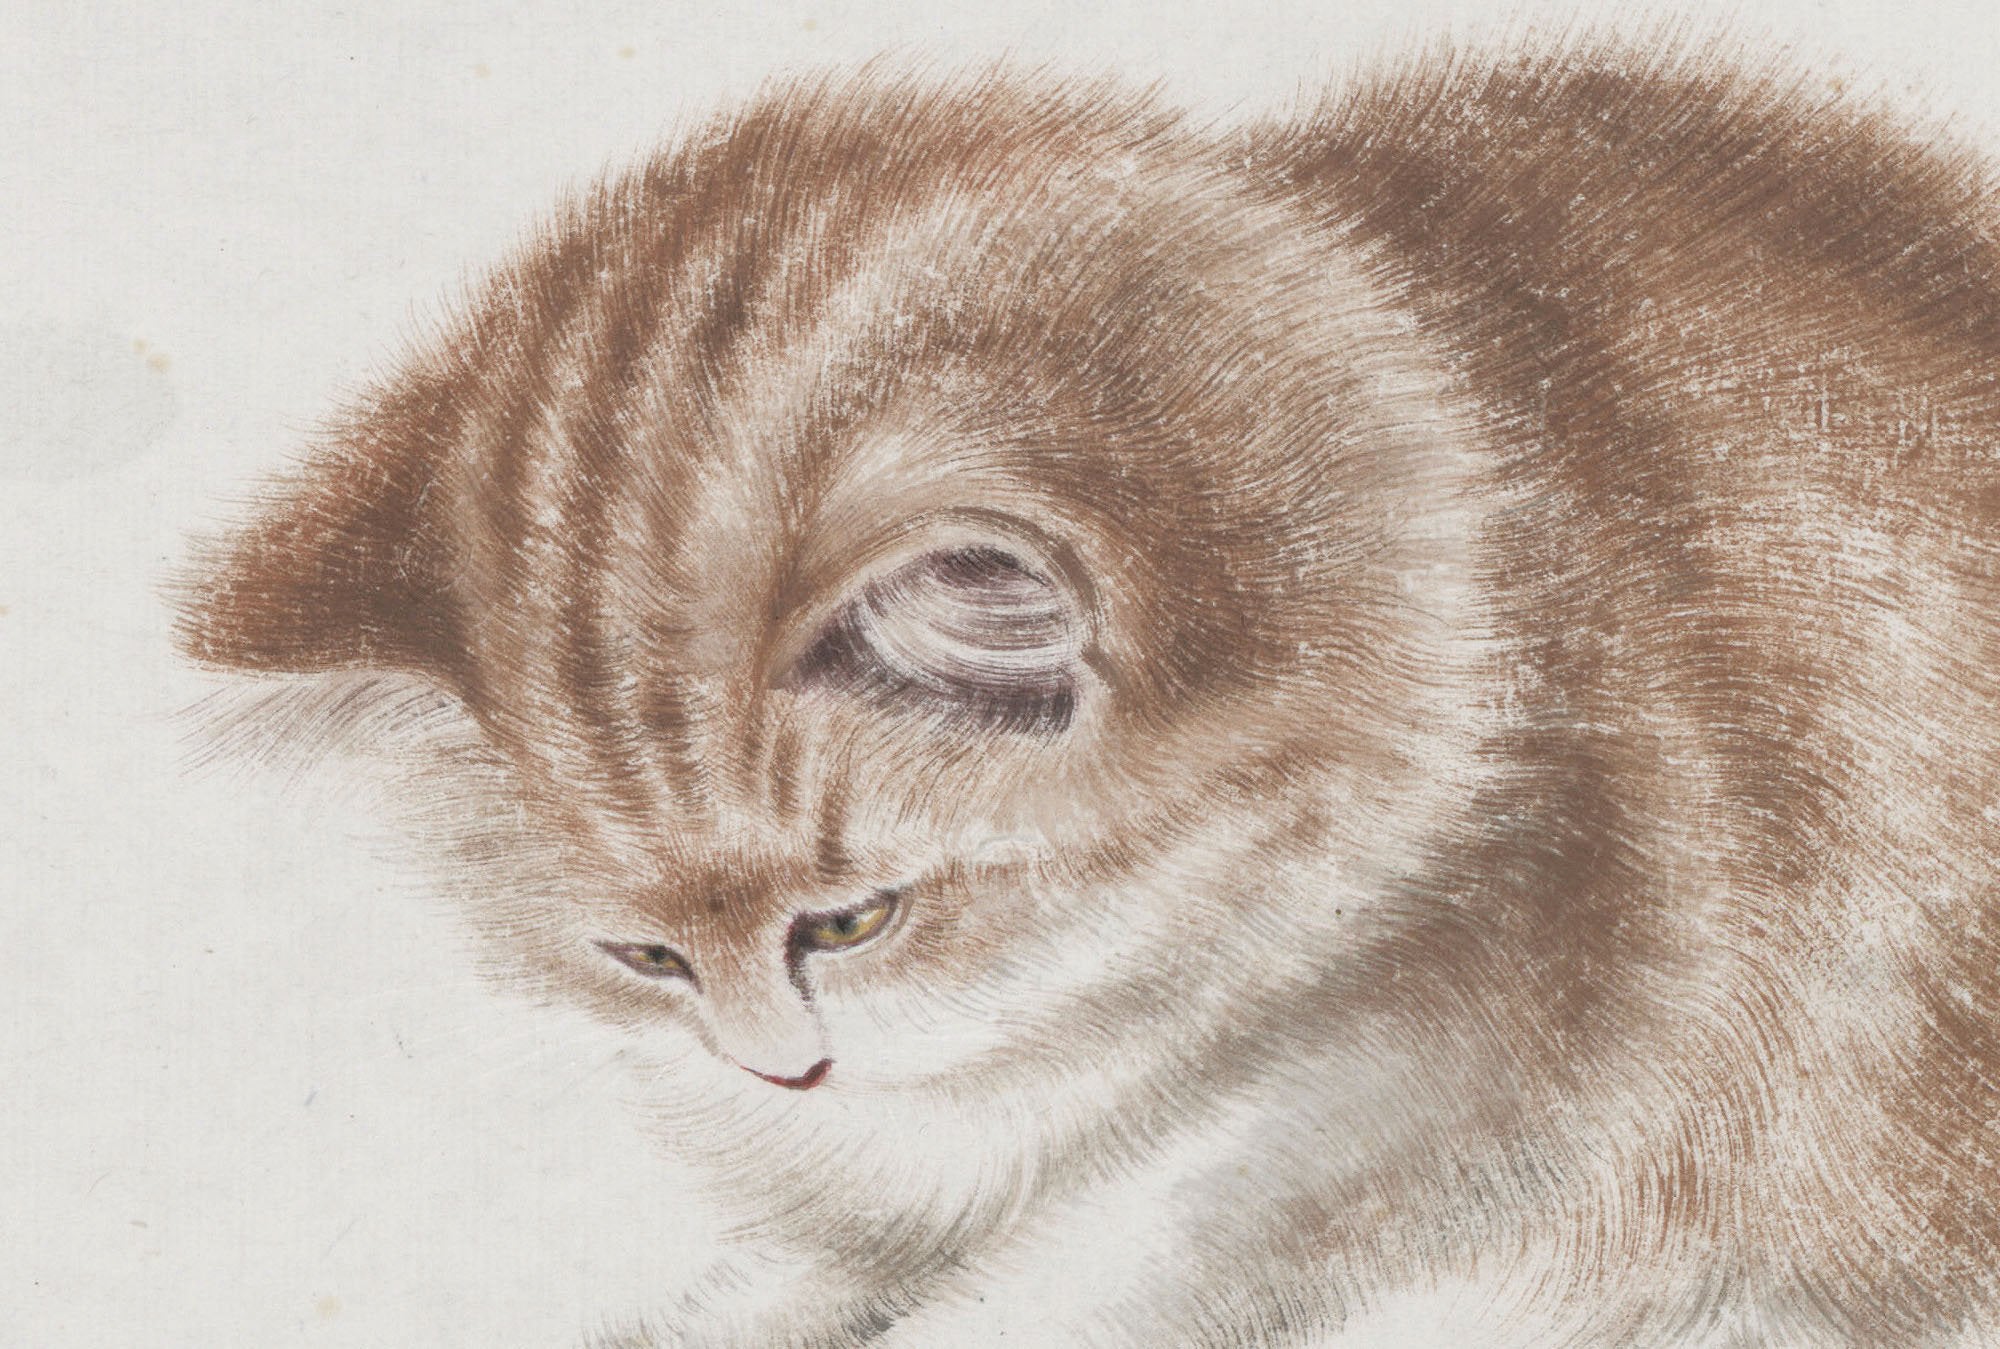 Chinese Antique Art Painting 齐白石 猫趣图 Qi Baishi Cute Cat China Ancient Wall Picture Ideas 3067-Chinese Style Finds™